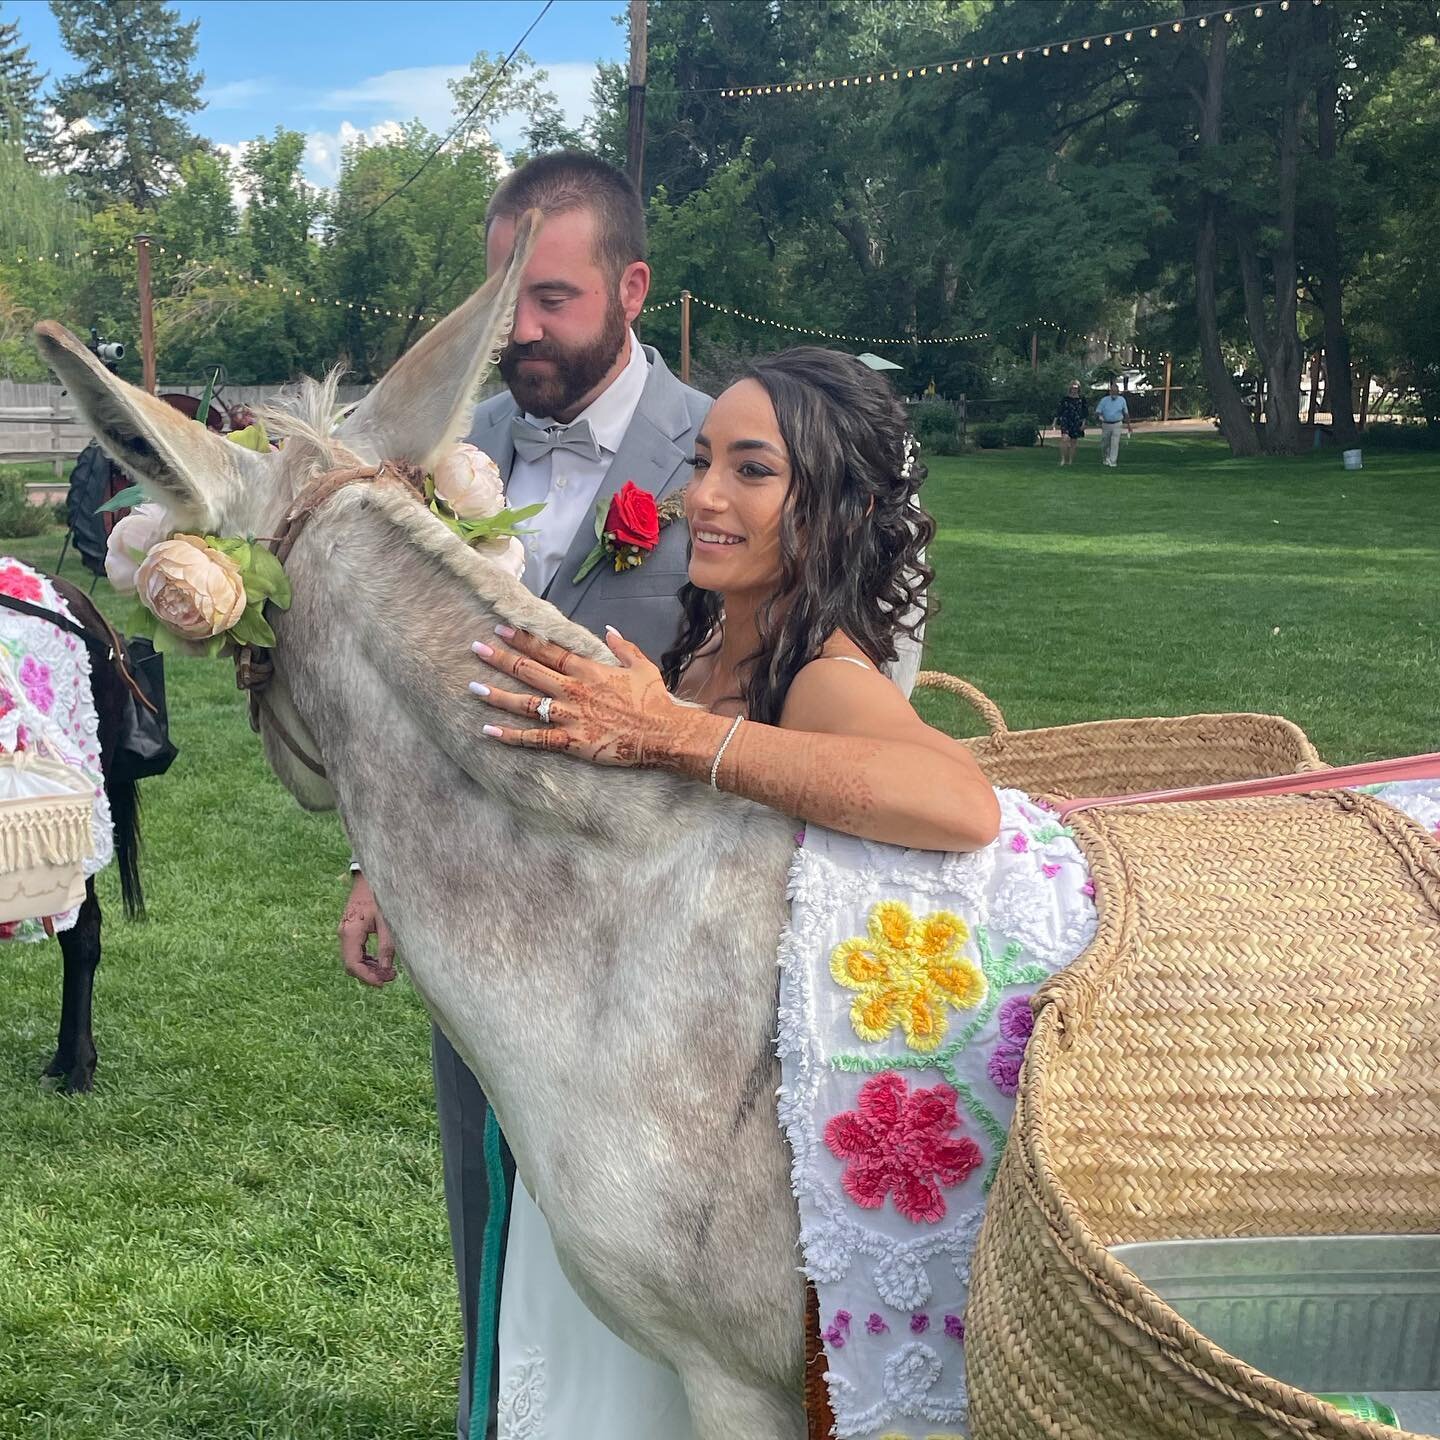 When the bride gives me a hug and then Iris and I proceed to smother their guests with affection @lyonsfarmette @dahliaeventslyons @sugarpinecatering thank you #coloradoweddings #bestweddingideas #donkeys